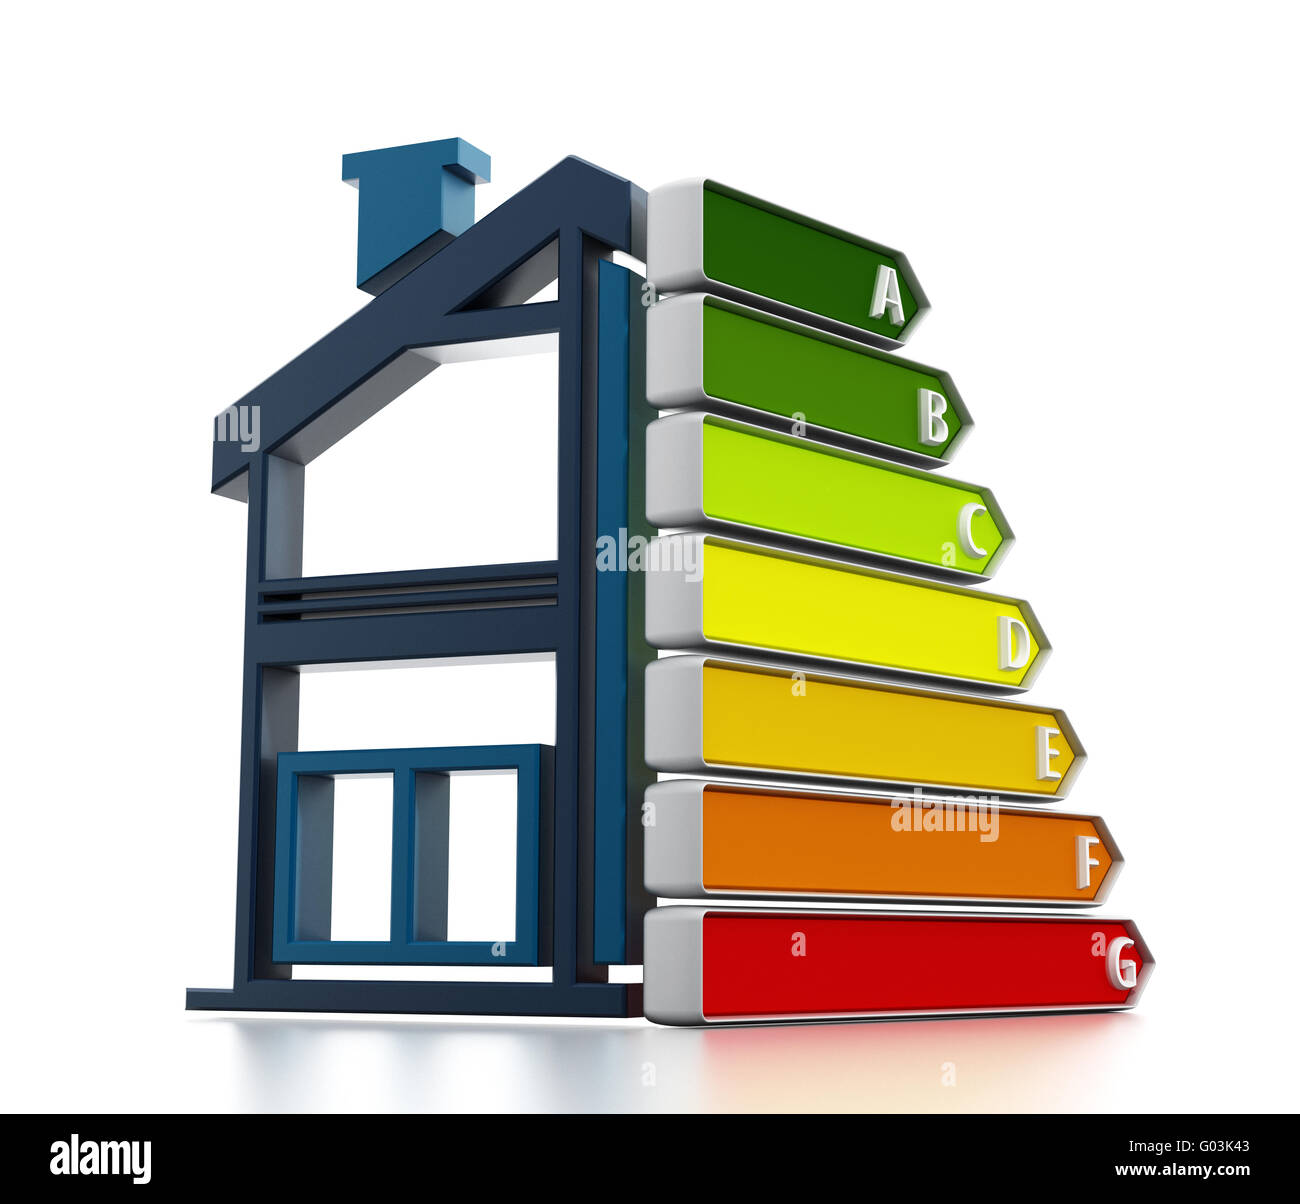 Energy efficiency chart with half illustration of a house. Stock Photo